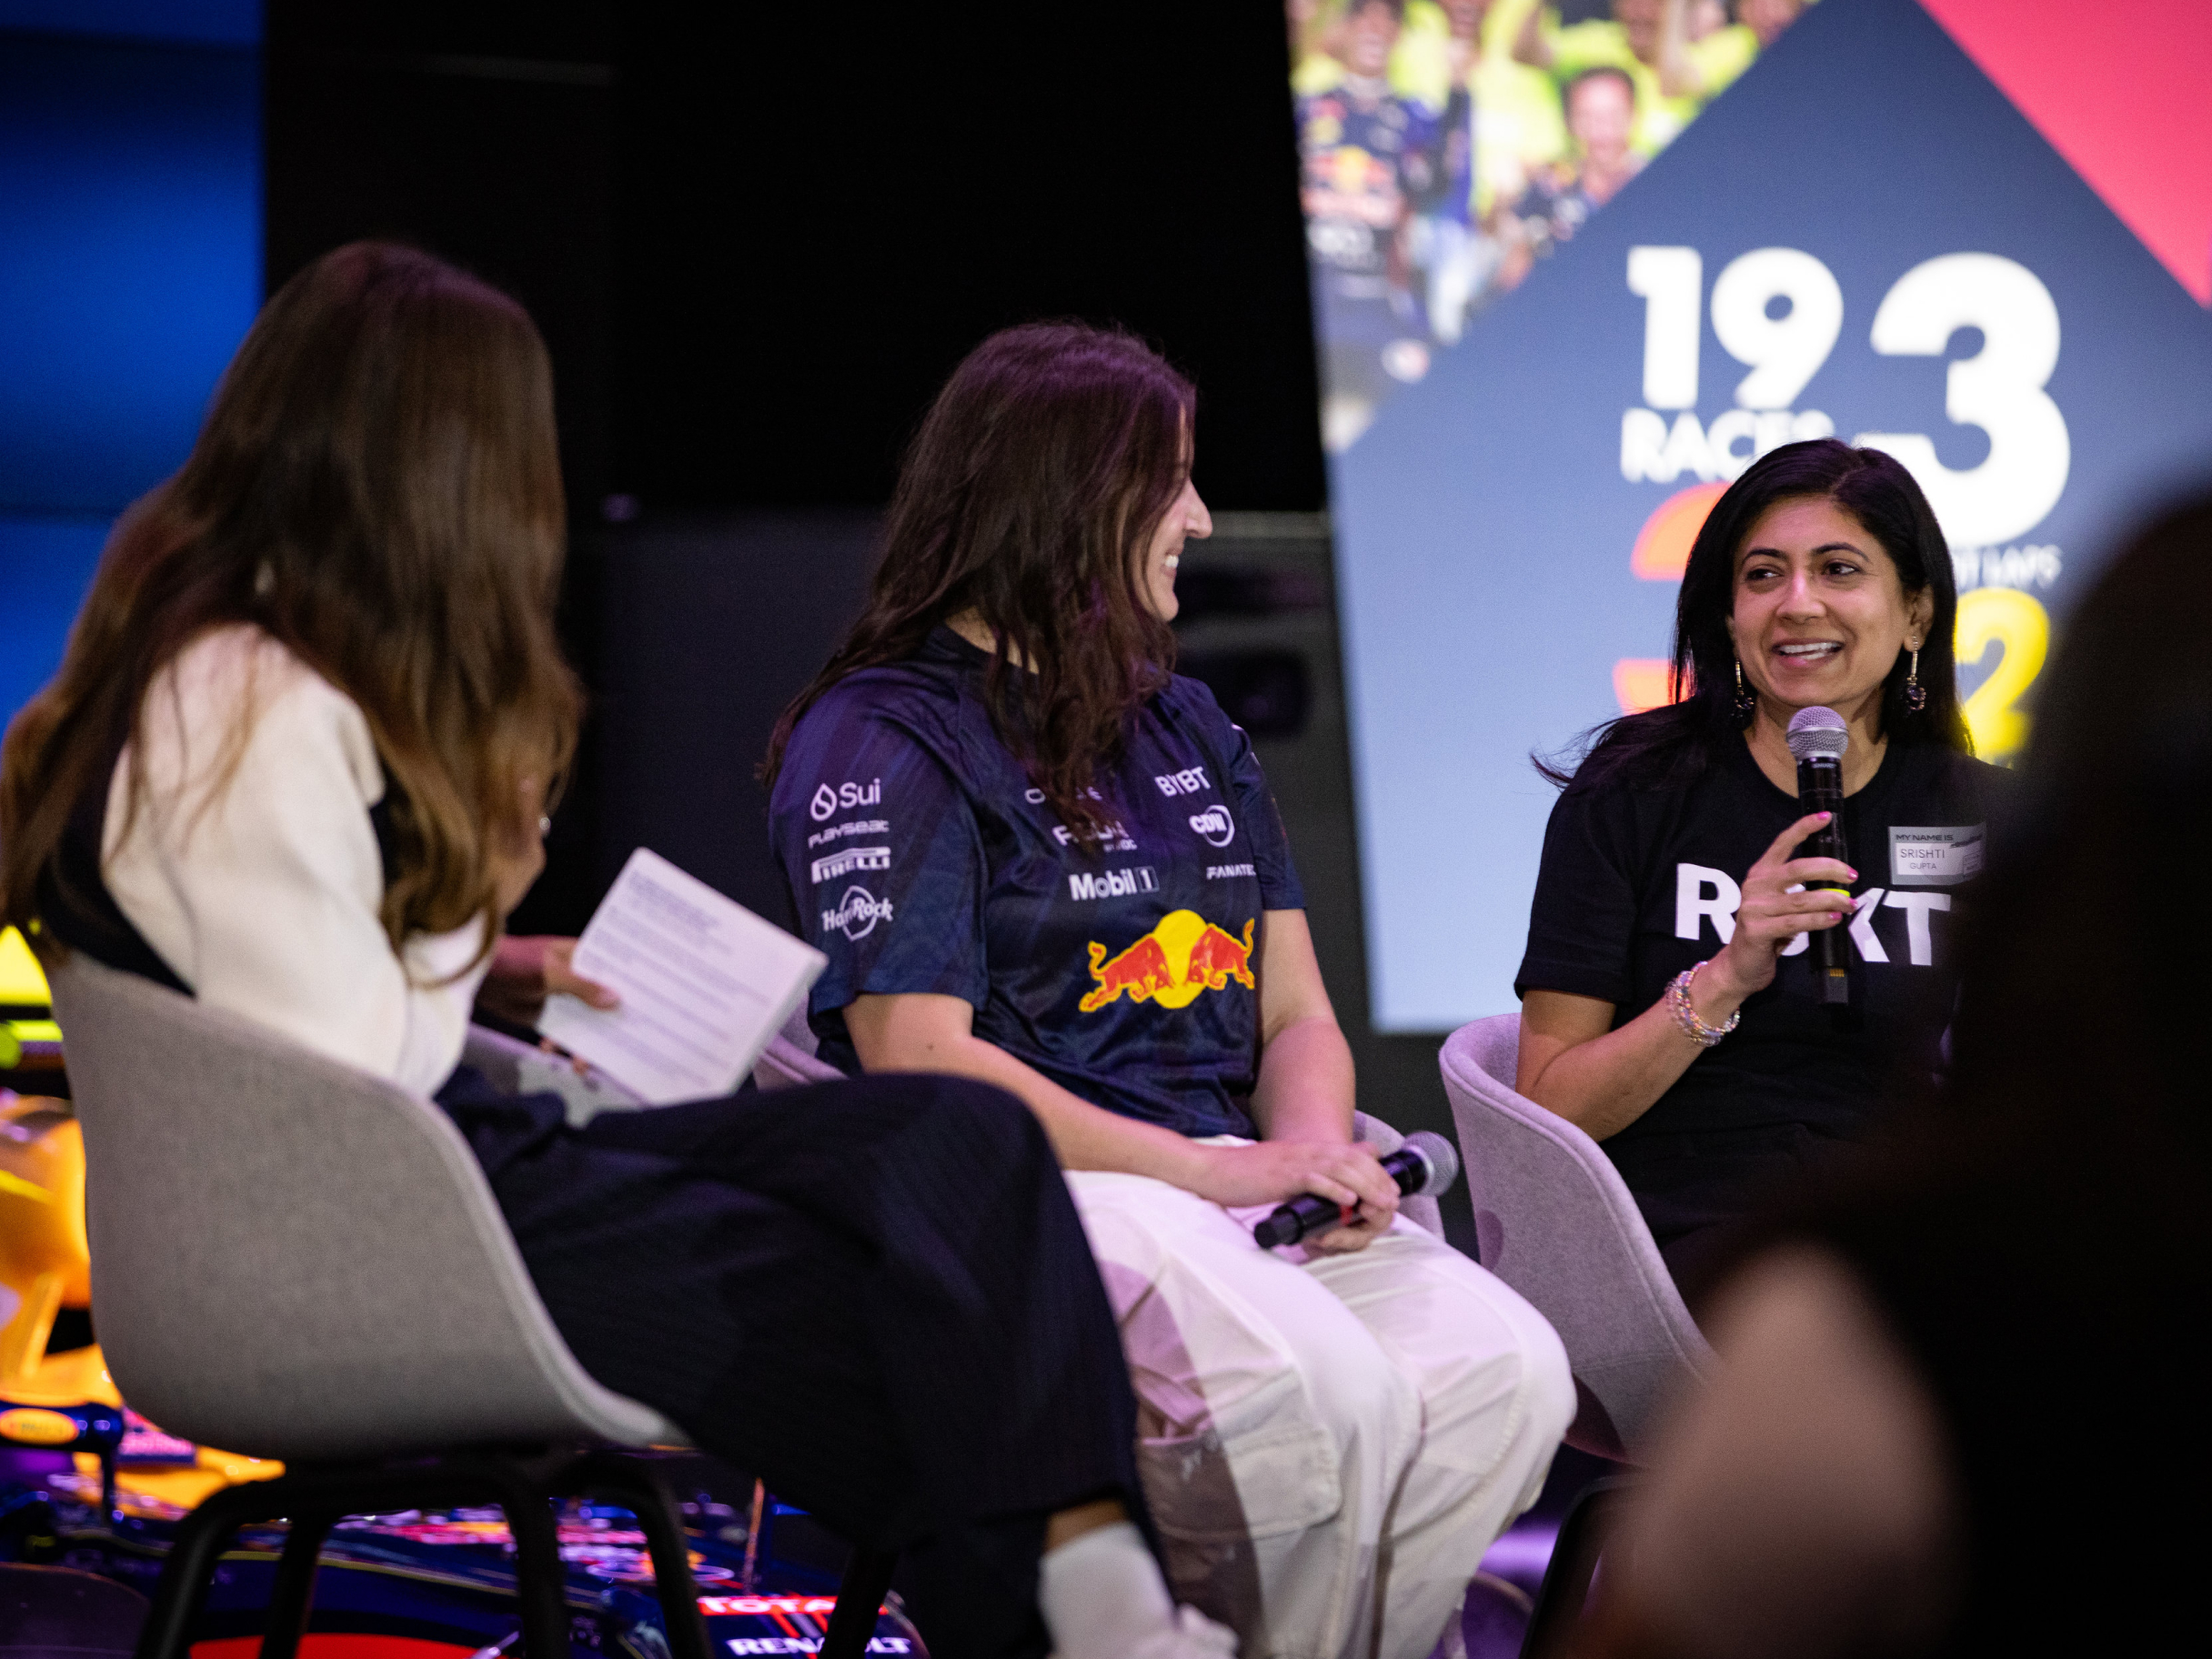 Celebrating Our Second Annual International Women in Engineering Day Event with Oracle Red Bull Racing